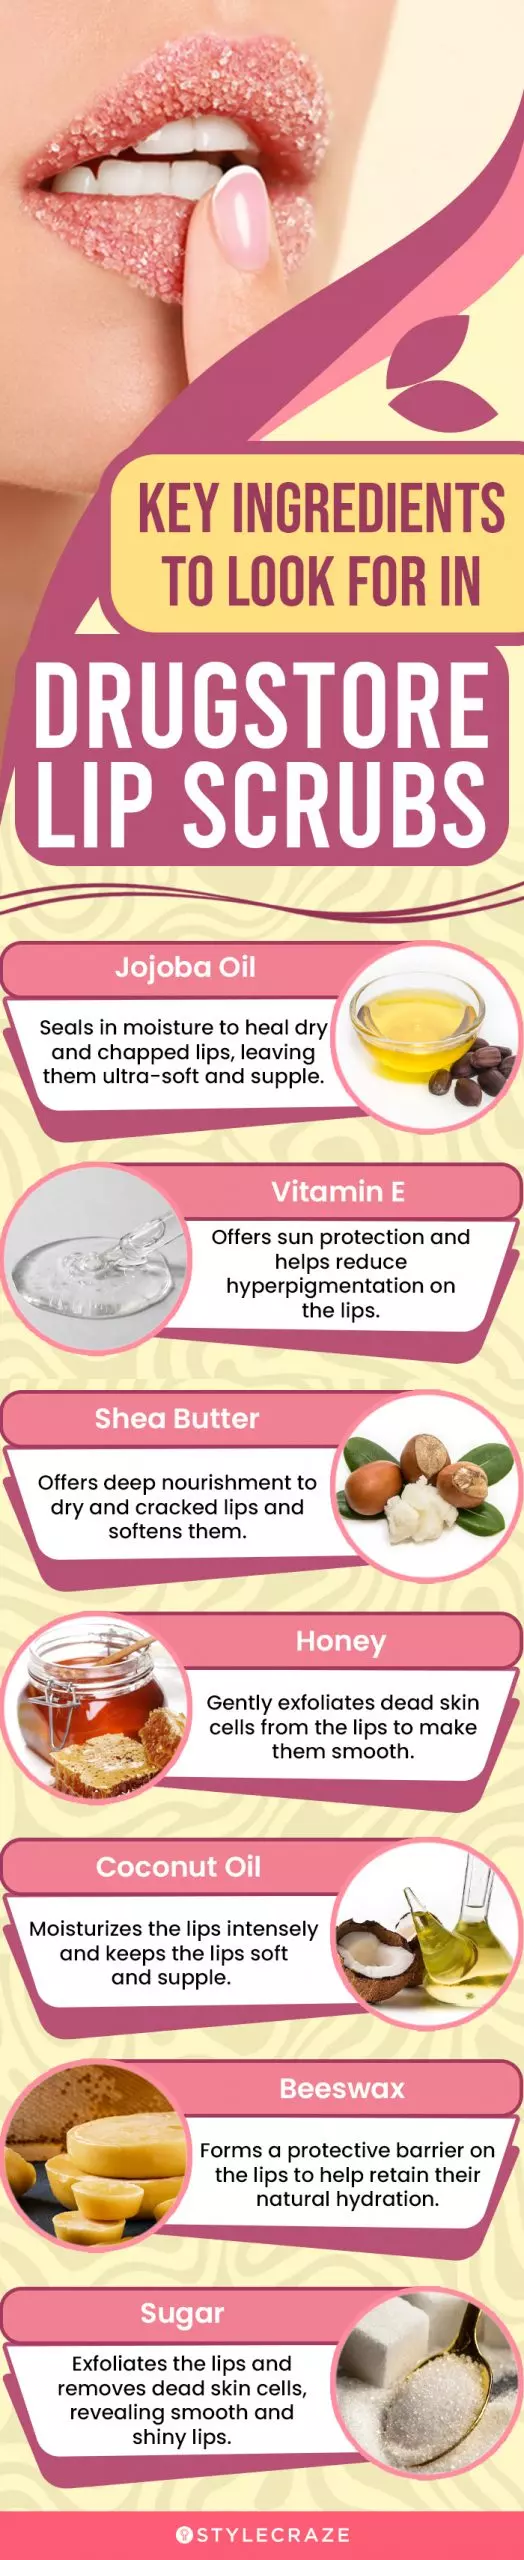 Key Ingredients To Look For In Drugstore Lip Scrub (infographic)